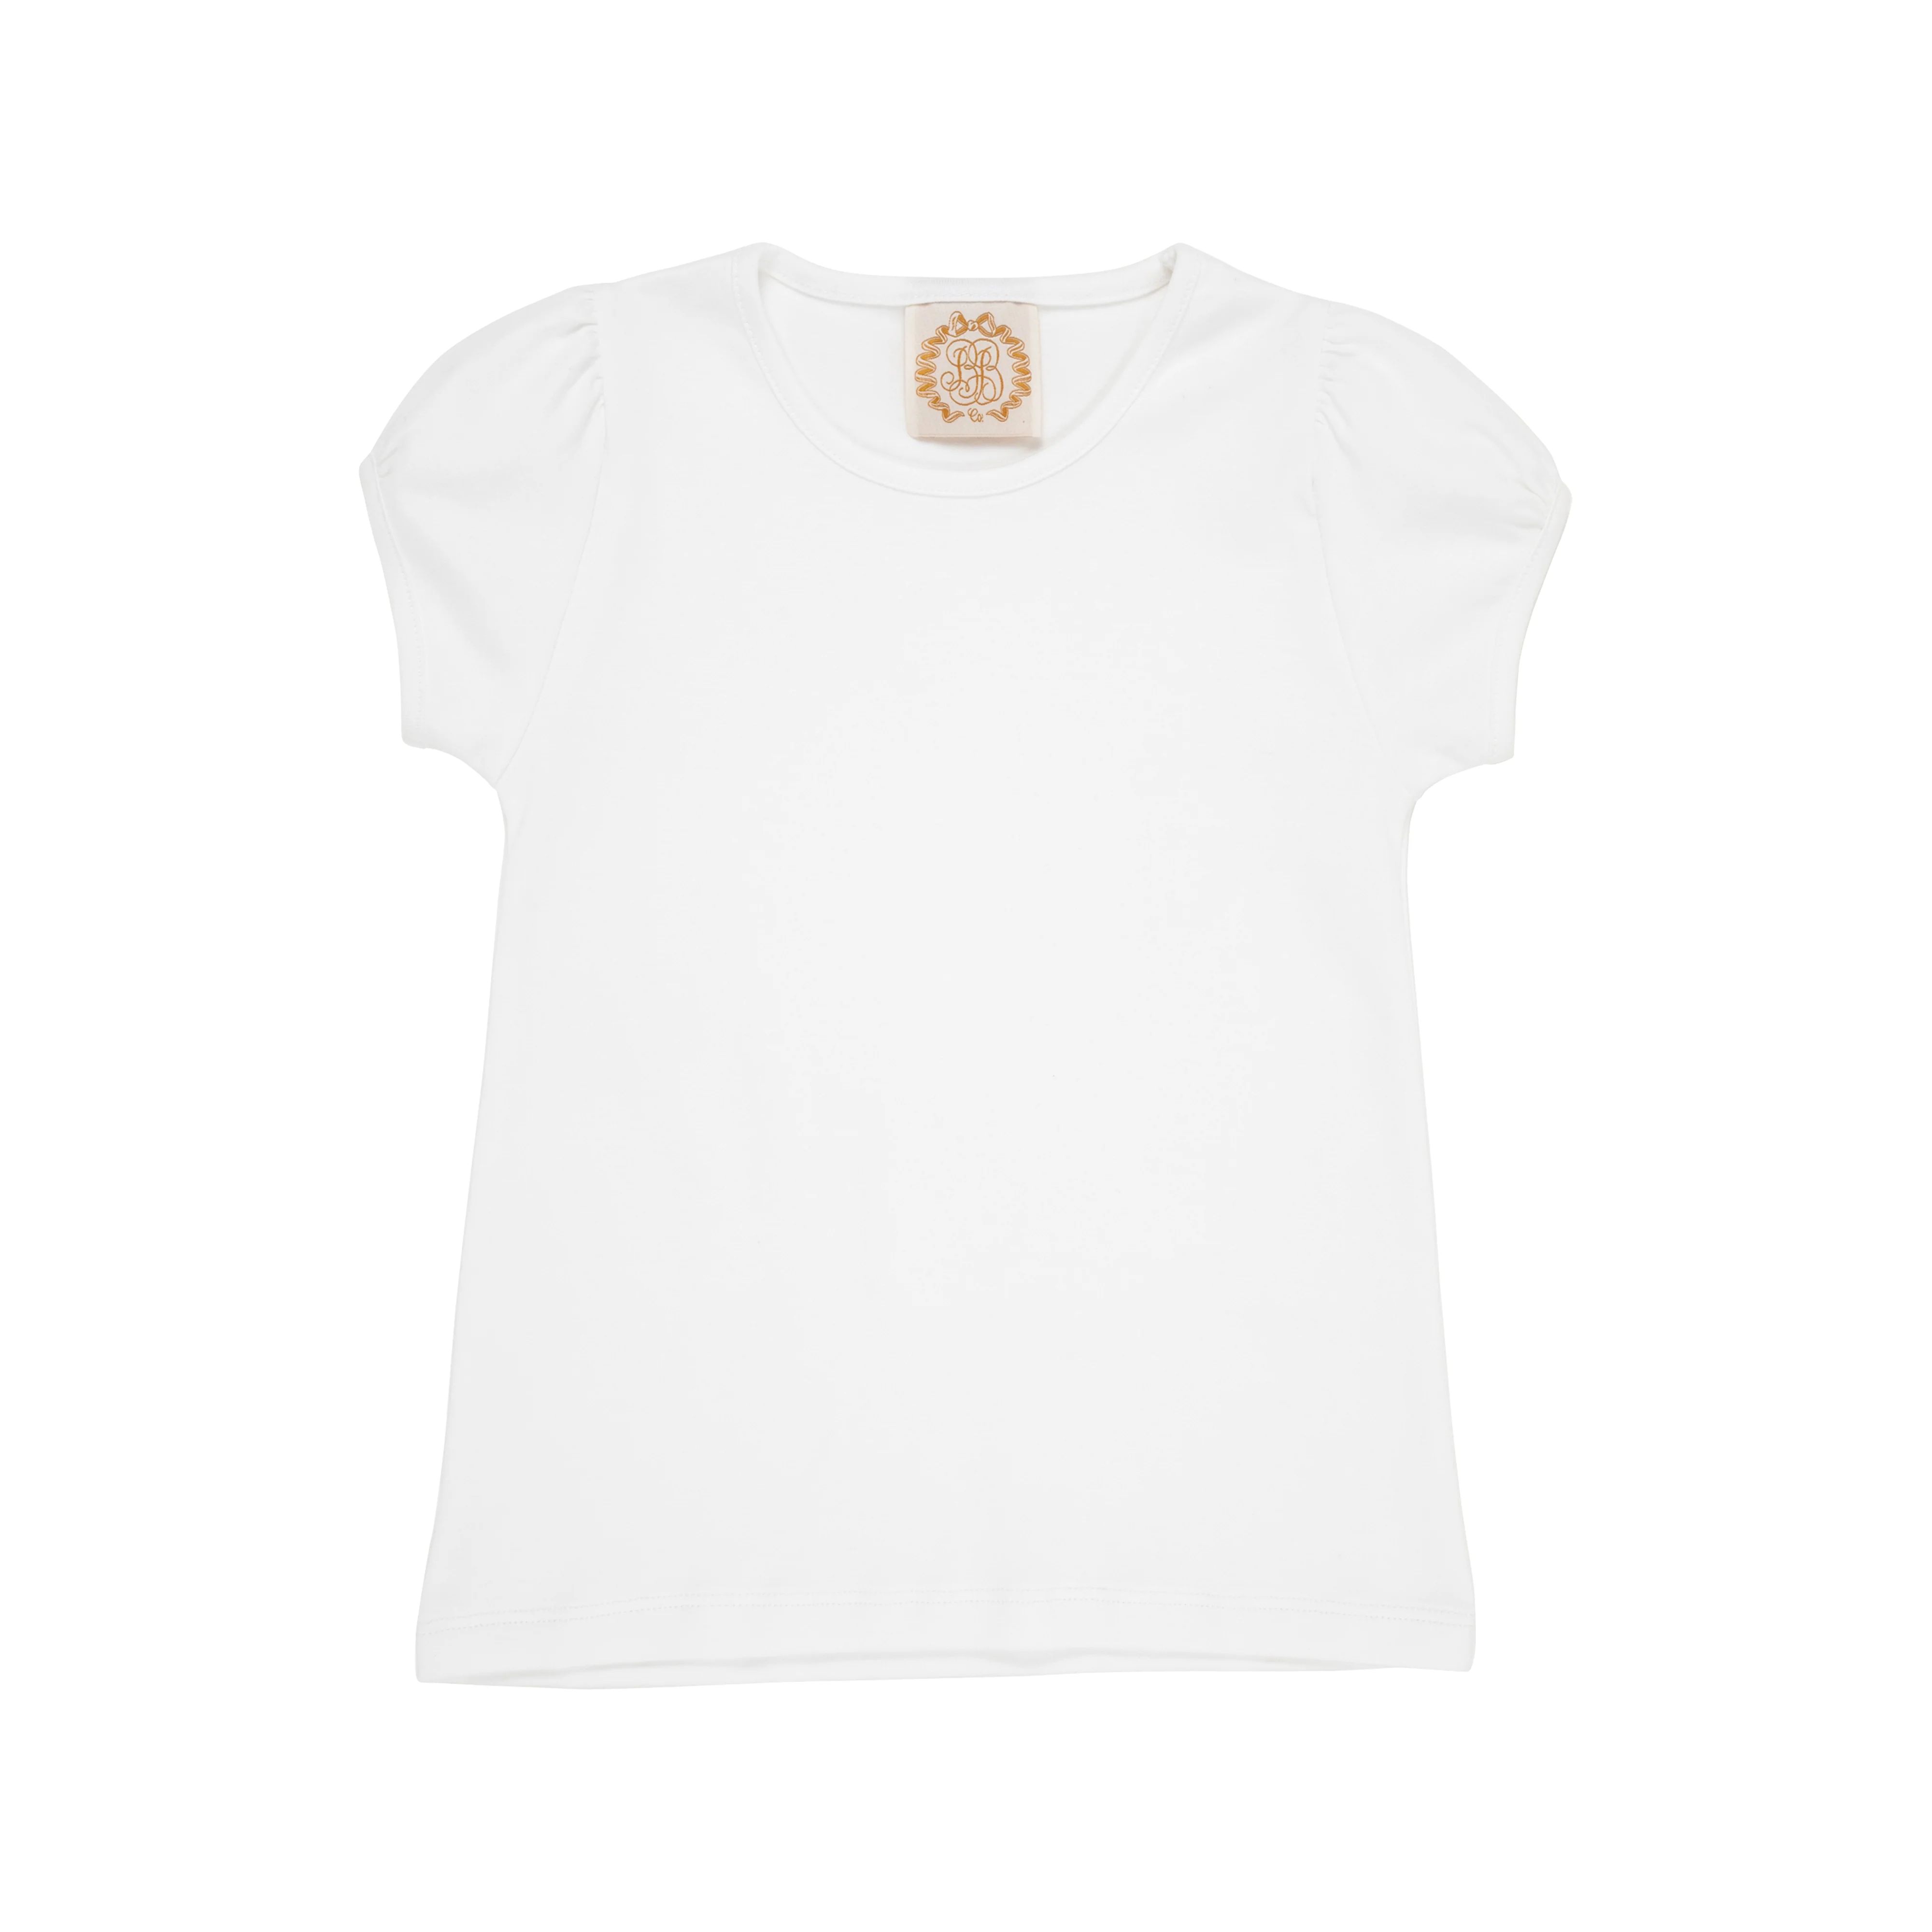 Penny's Play Shirt & Onesie - Worth Avenue White | The Beaufort Bonnet Company